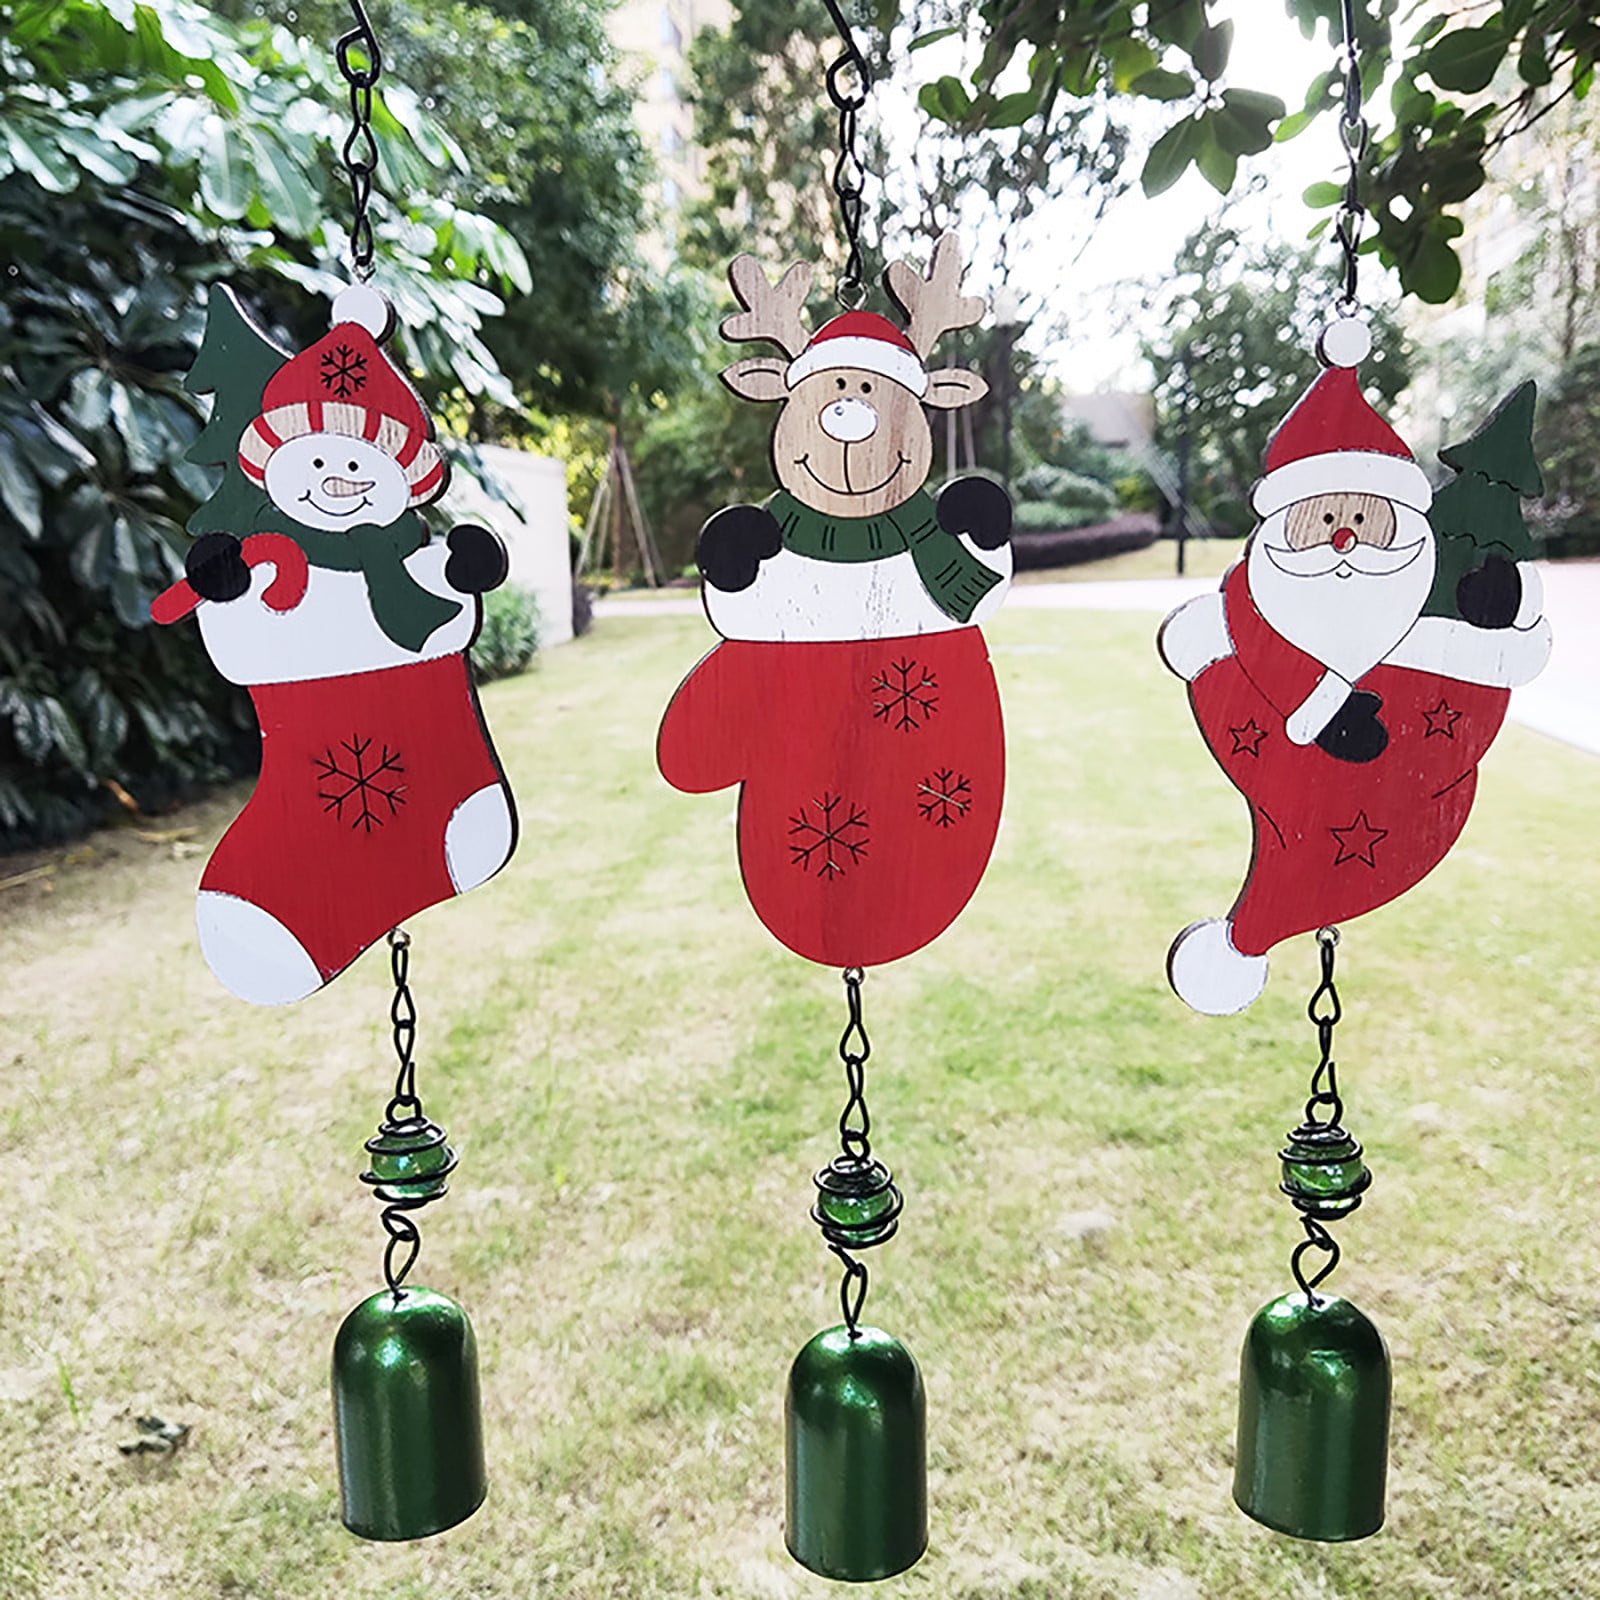 2 Pack Wind Chimes Handmade Elk Retro Hanging Bells Wall Hanging Home Decoration Outdoor Indoor Decor Ornament Craft Christmas Festival Gift